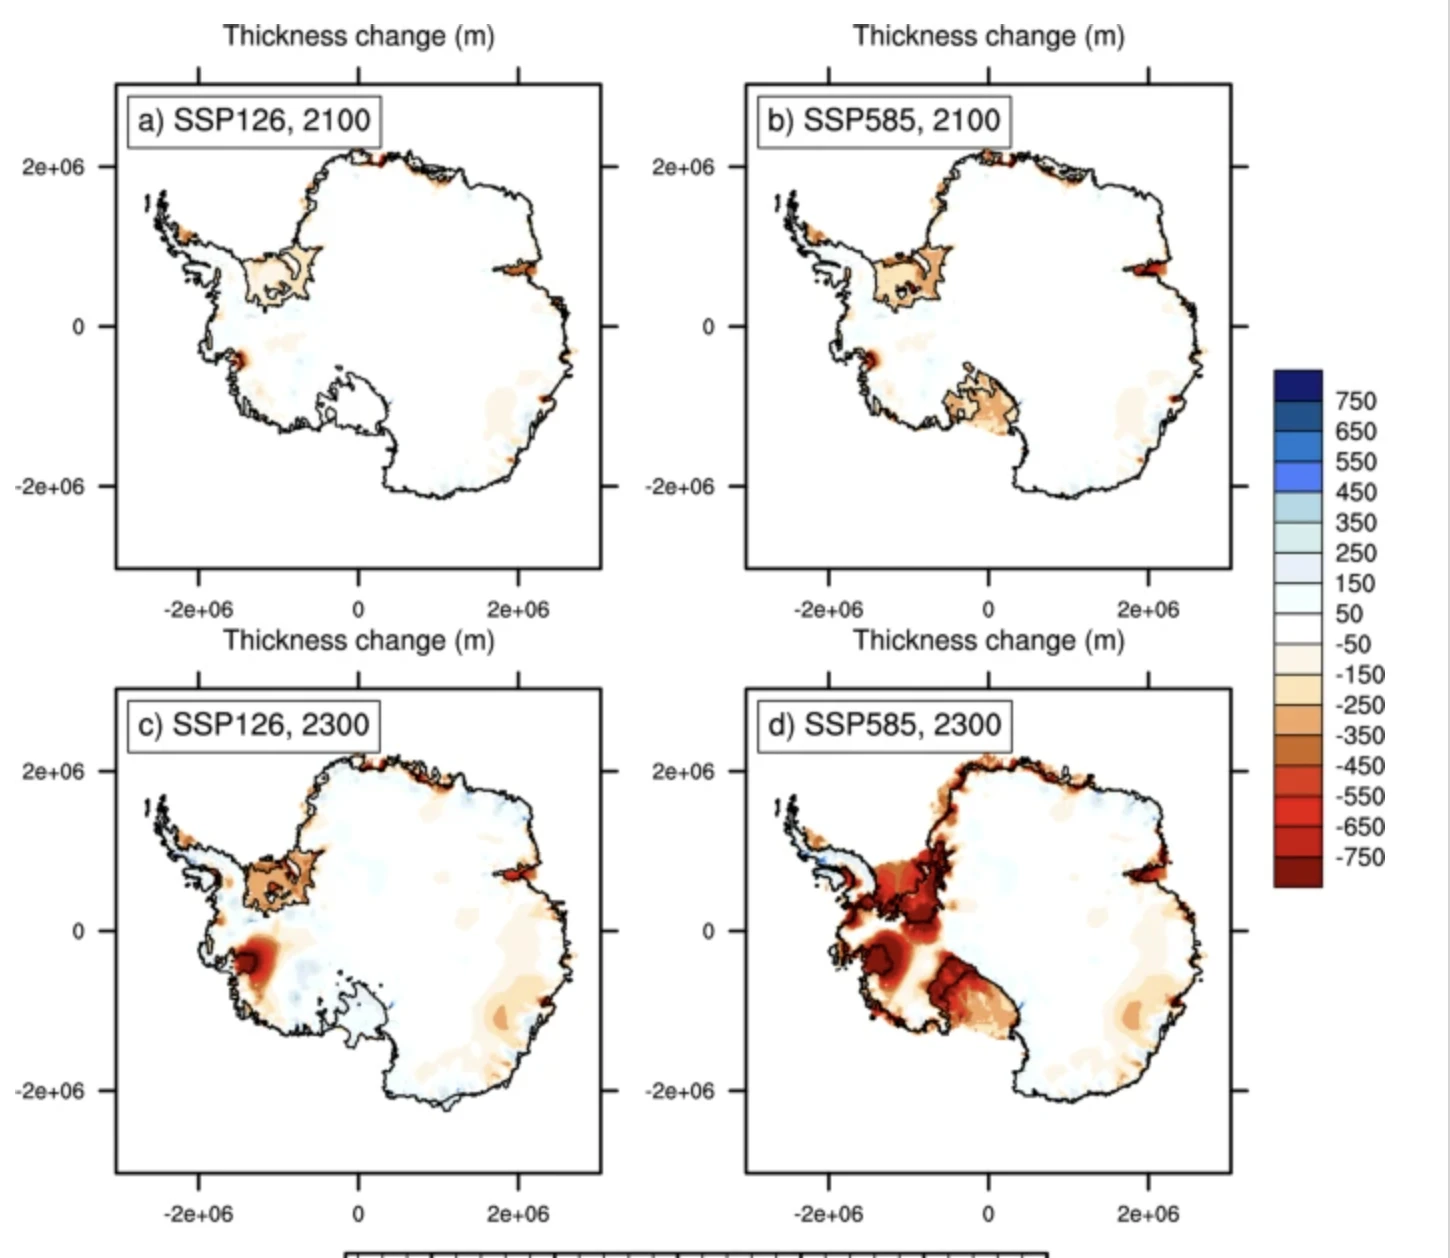 The influence of emissions scenarios on future Antarctic ice loss is unlikely to emerge this century